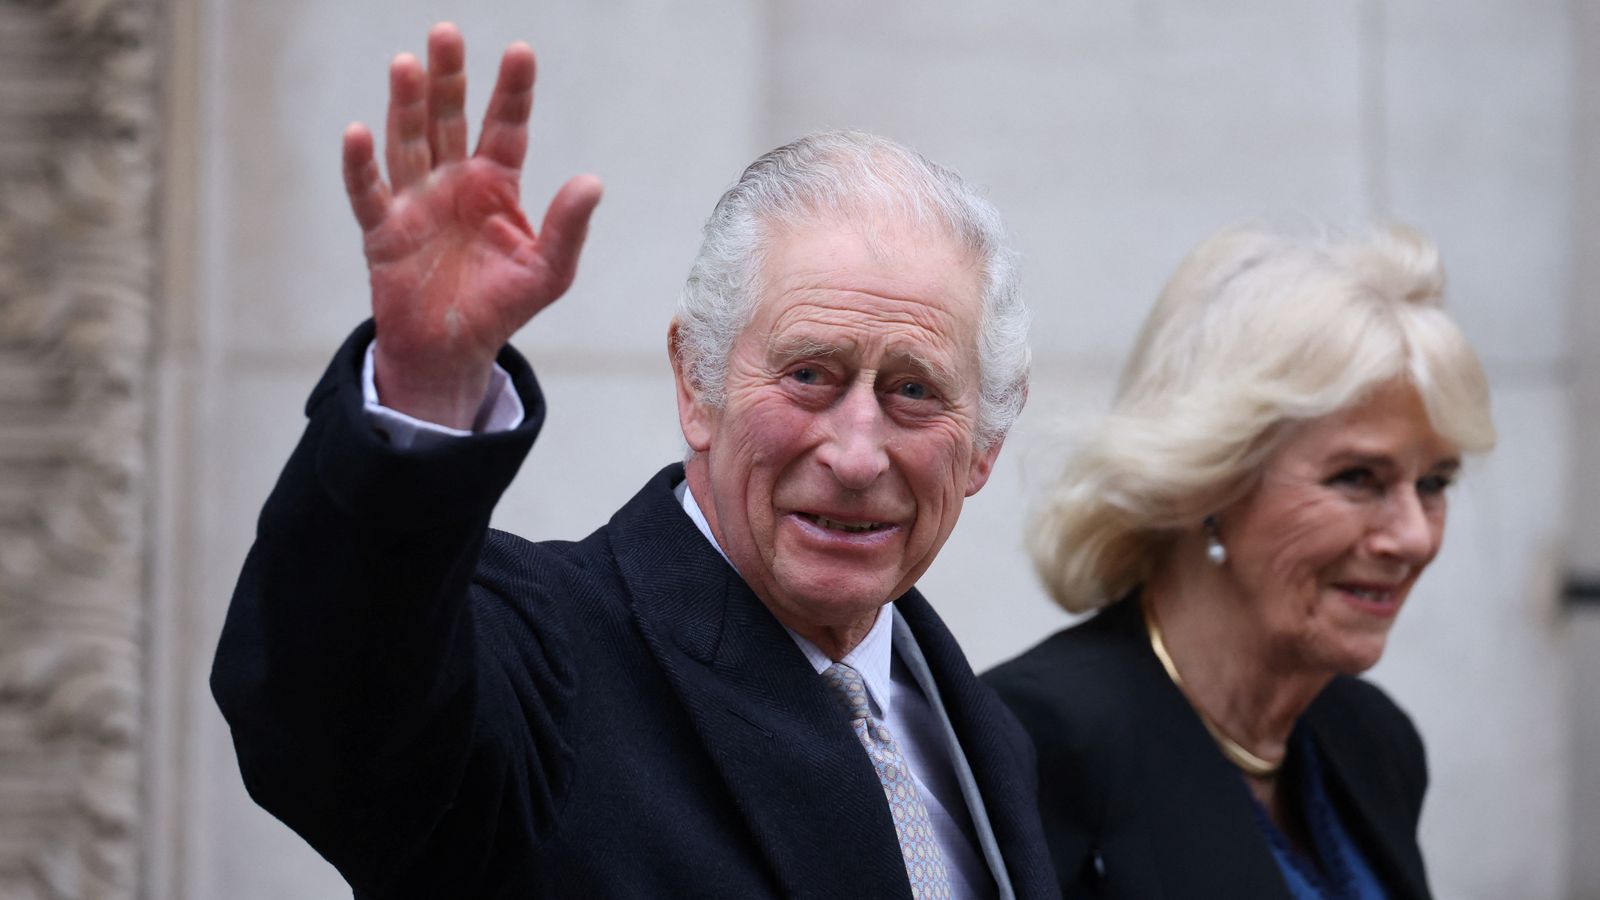 King Charles of Britain diagnosed with cancer, will postpone public duties